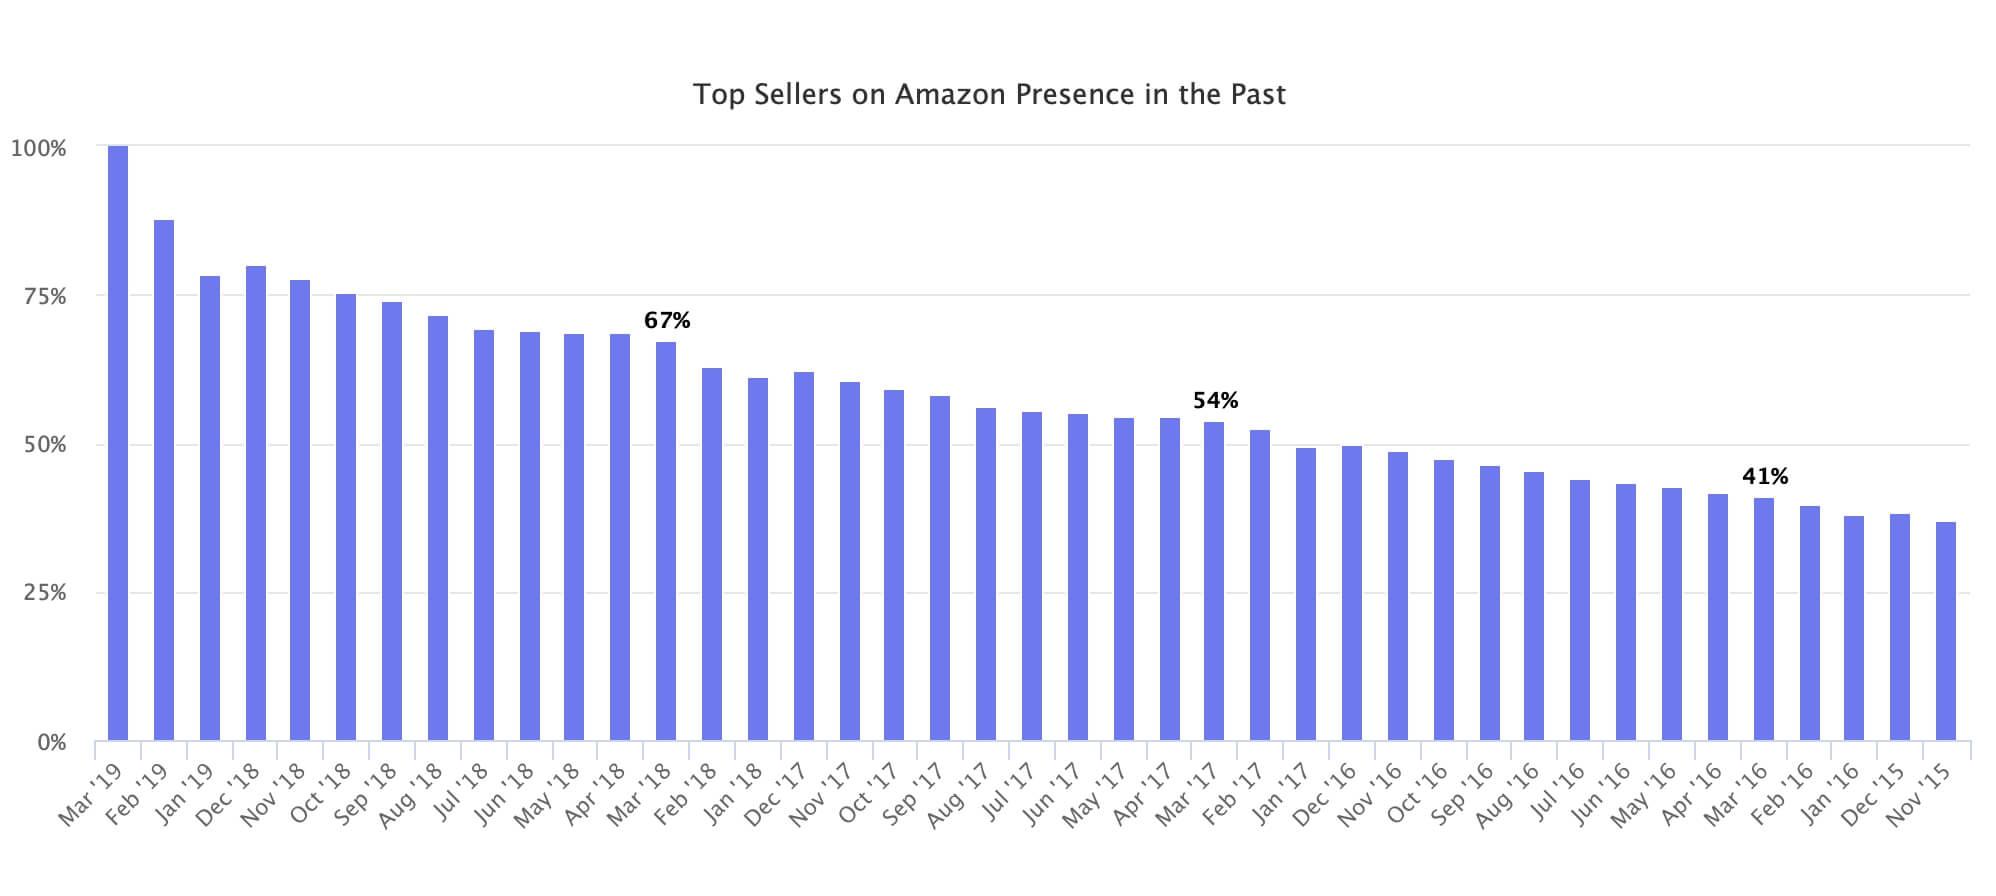 Top Sellers on Amazon Presence in the Past